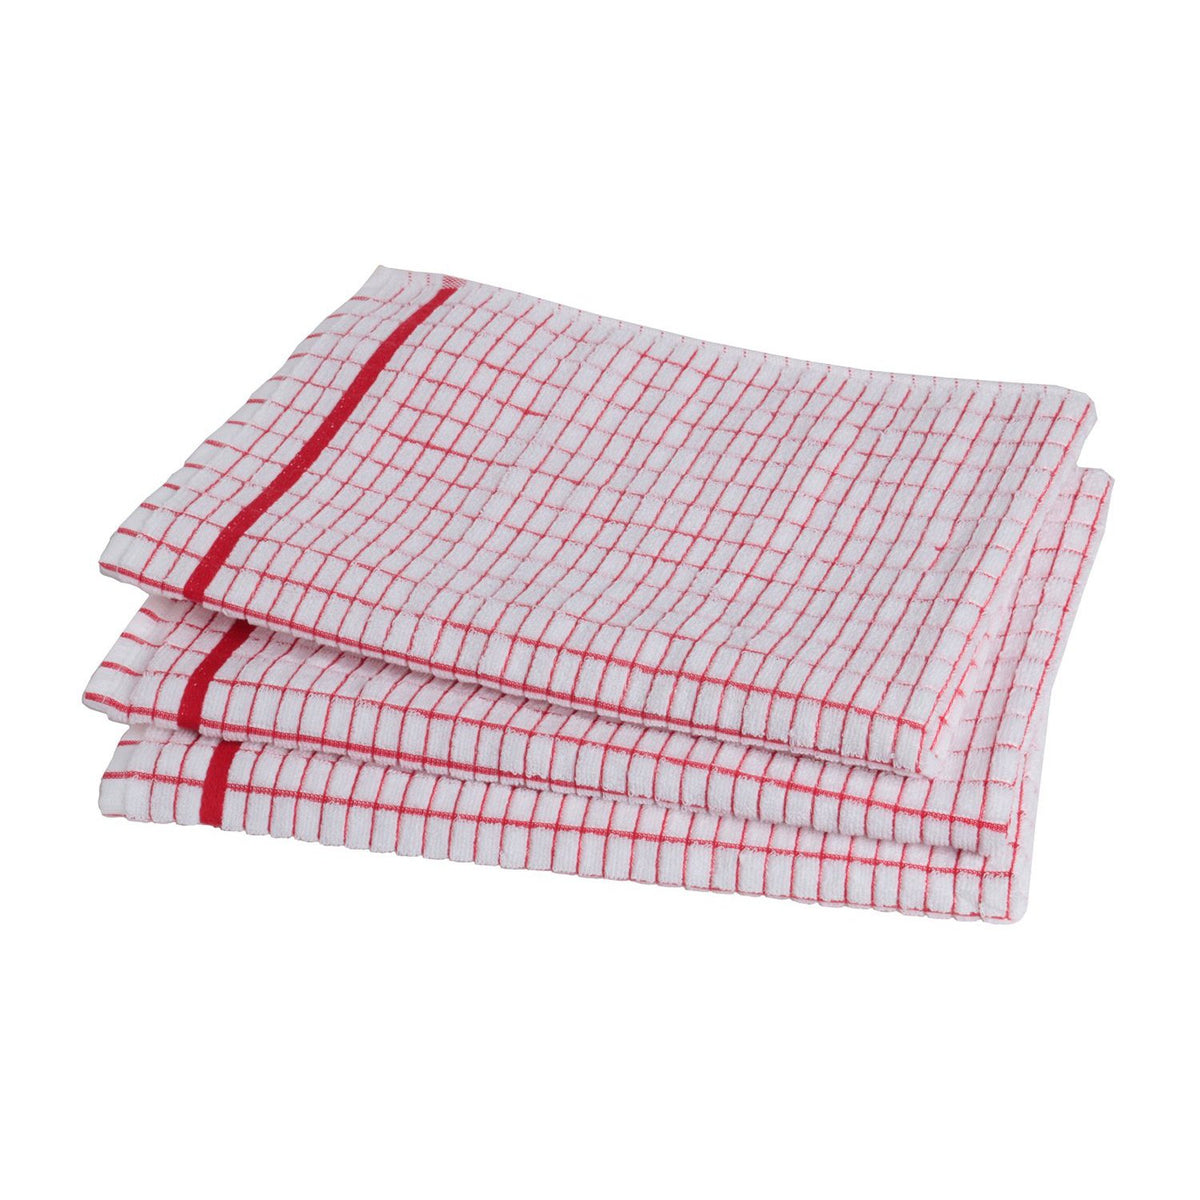 Checkered Kitchen Cotton Towels Folded Brown Texture Table Kitchenware  Kitchen Stock Photo by ©zver2334 657466848